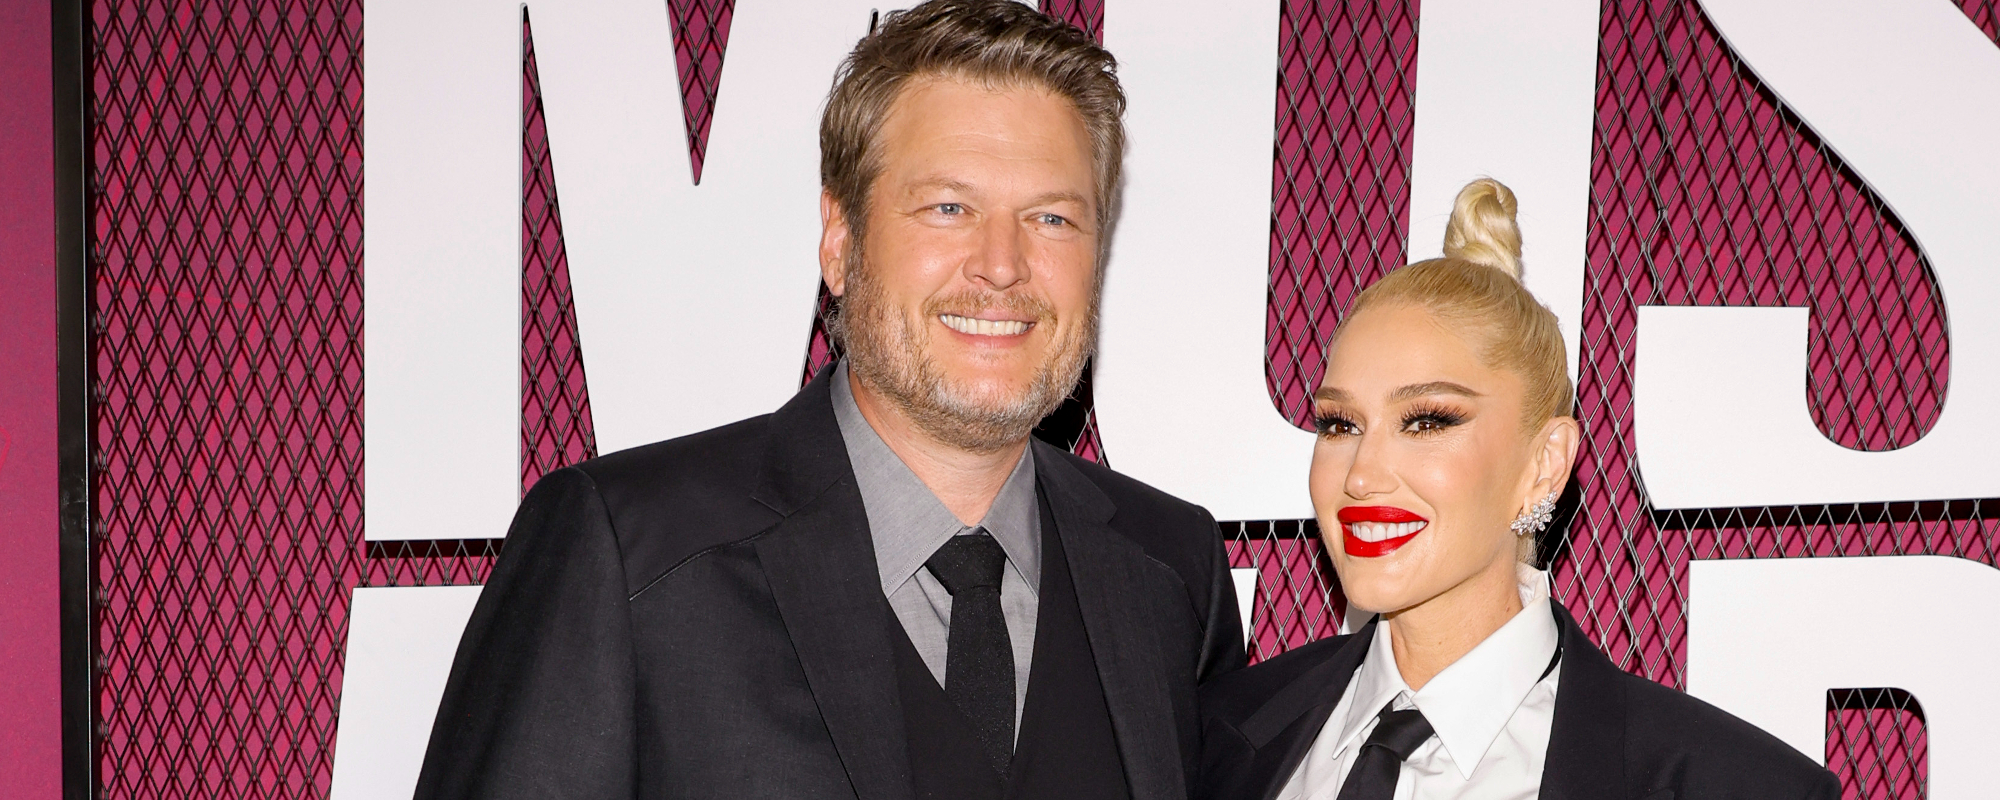 Blake Shelton Opens Up About the Importance & Stresses of Being a Stepdad to Gwen Stefani’s Kids